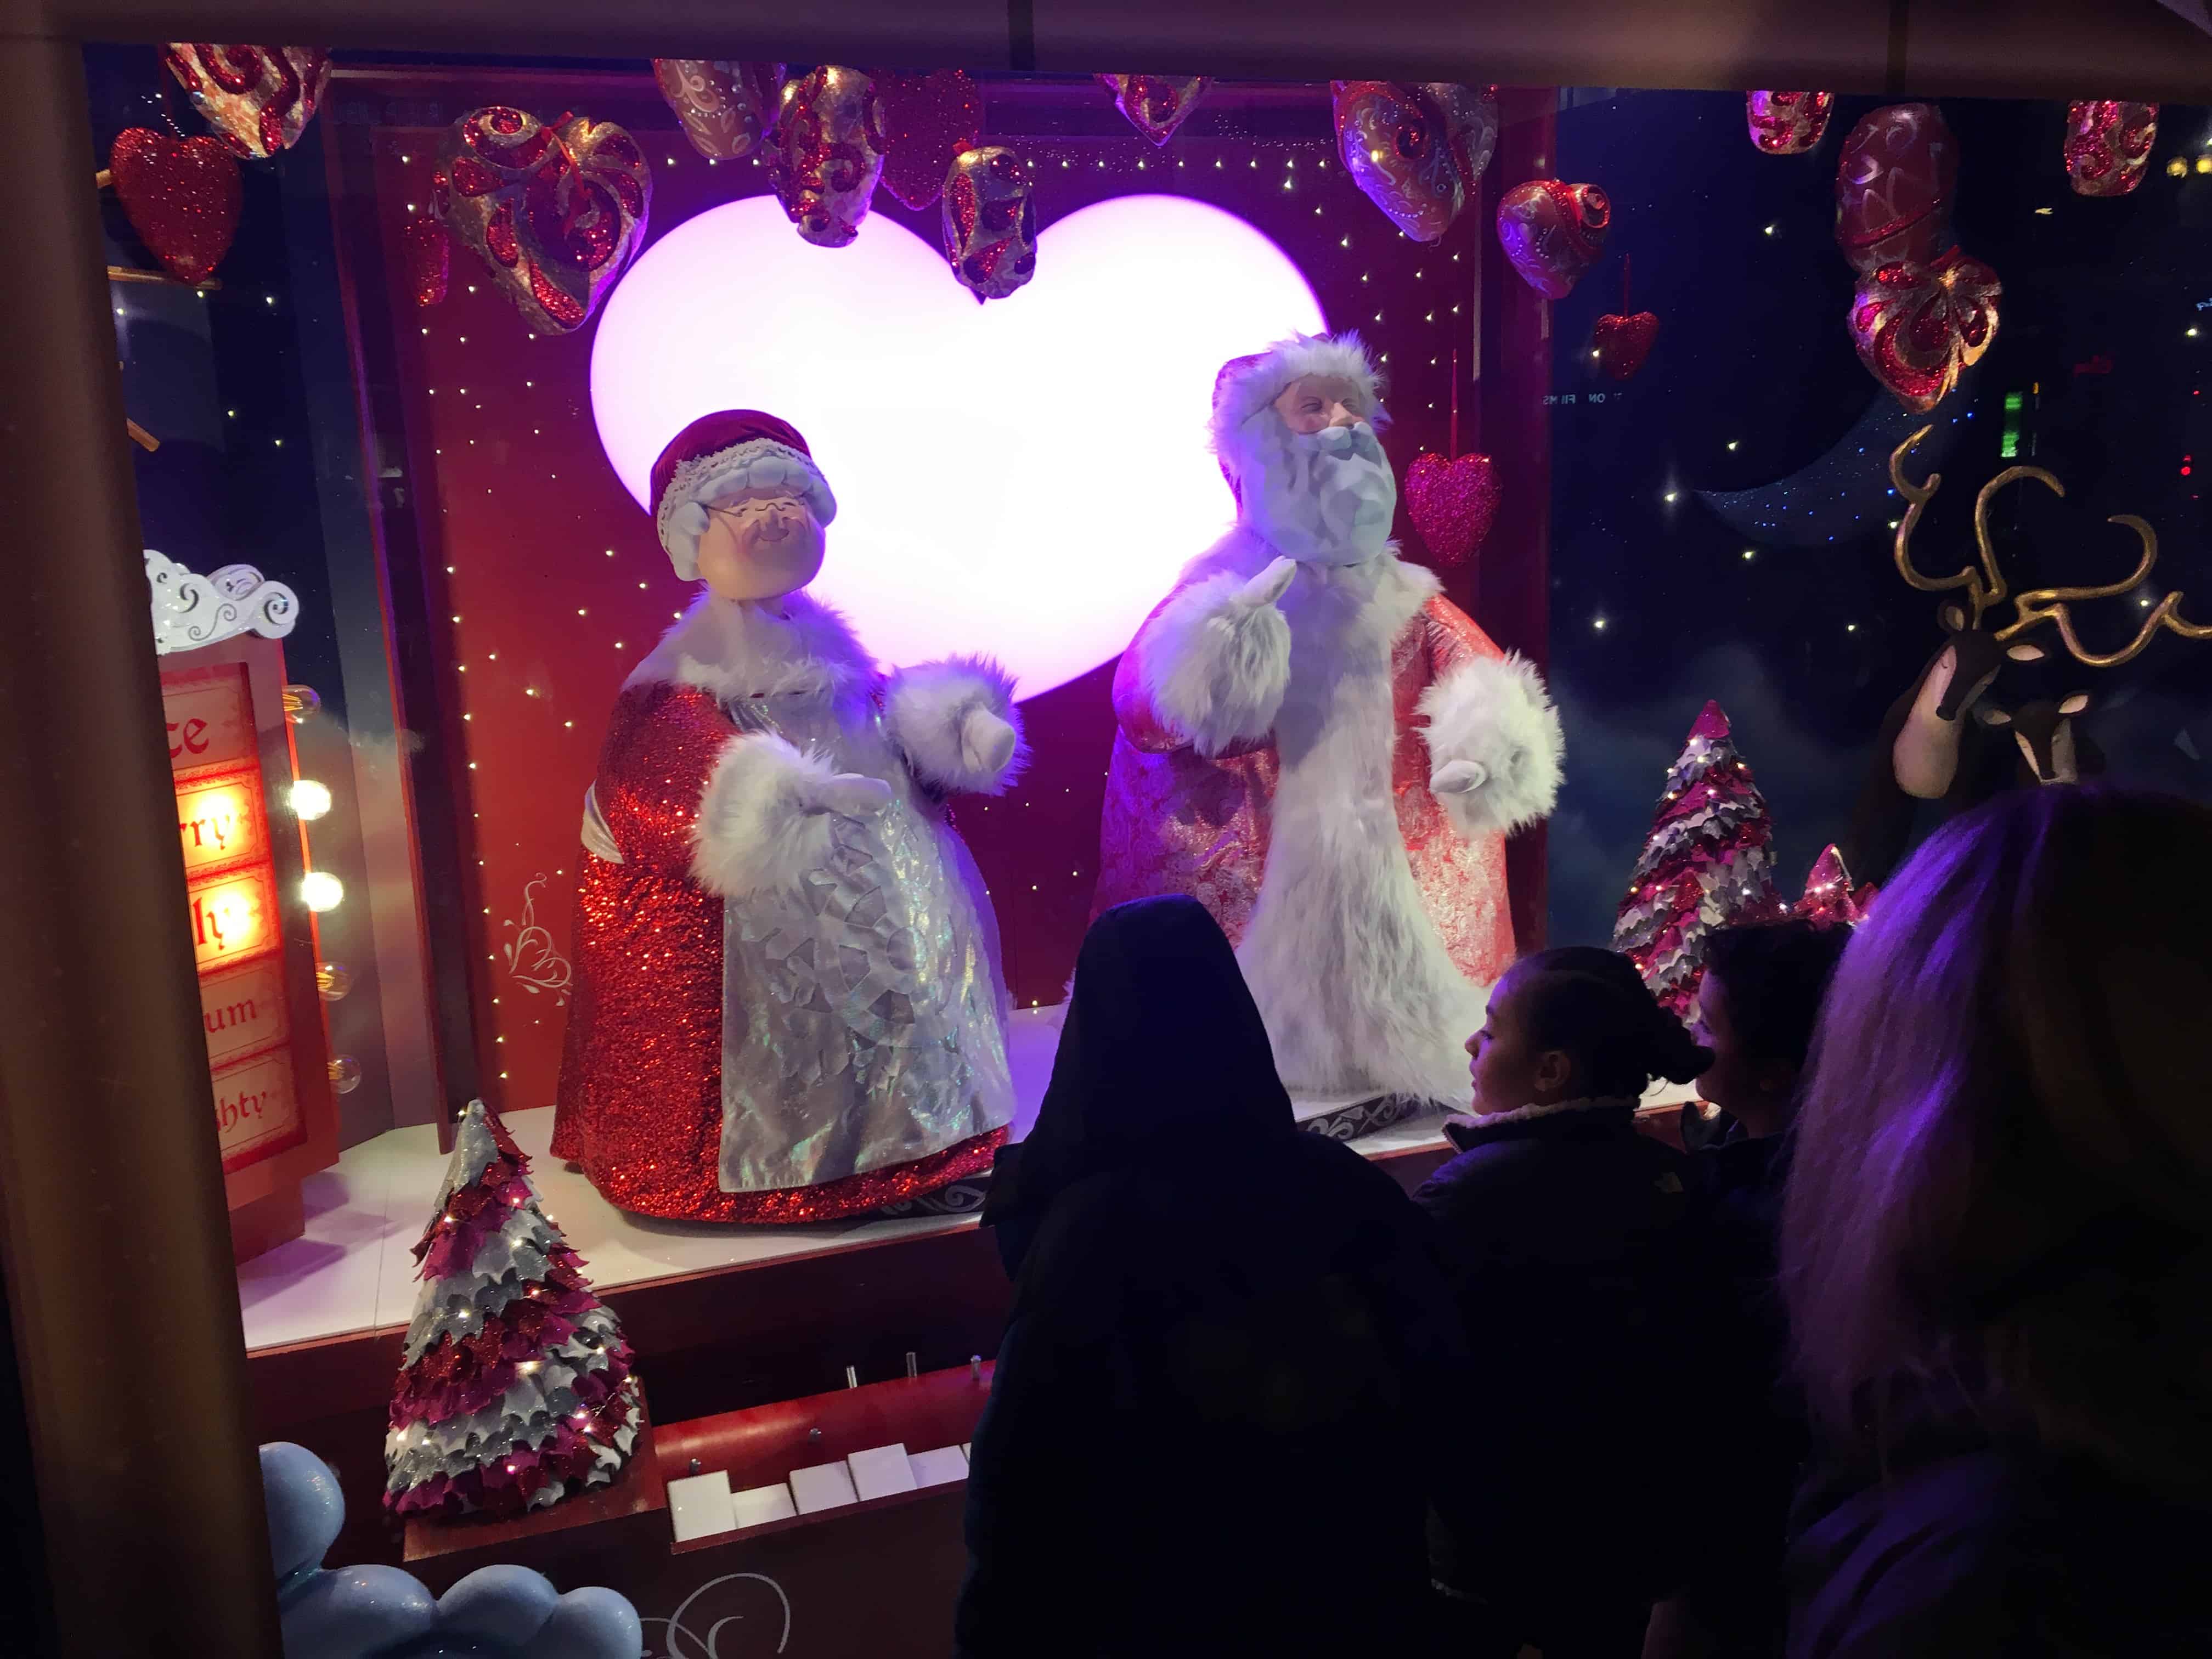 Holiday window display at Macy's in Chicago, Illinois